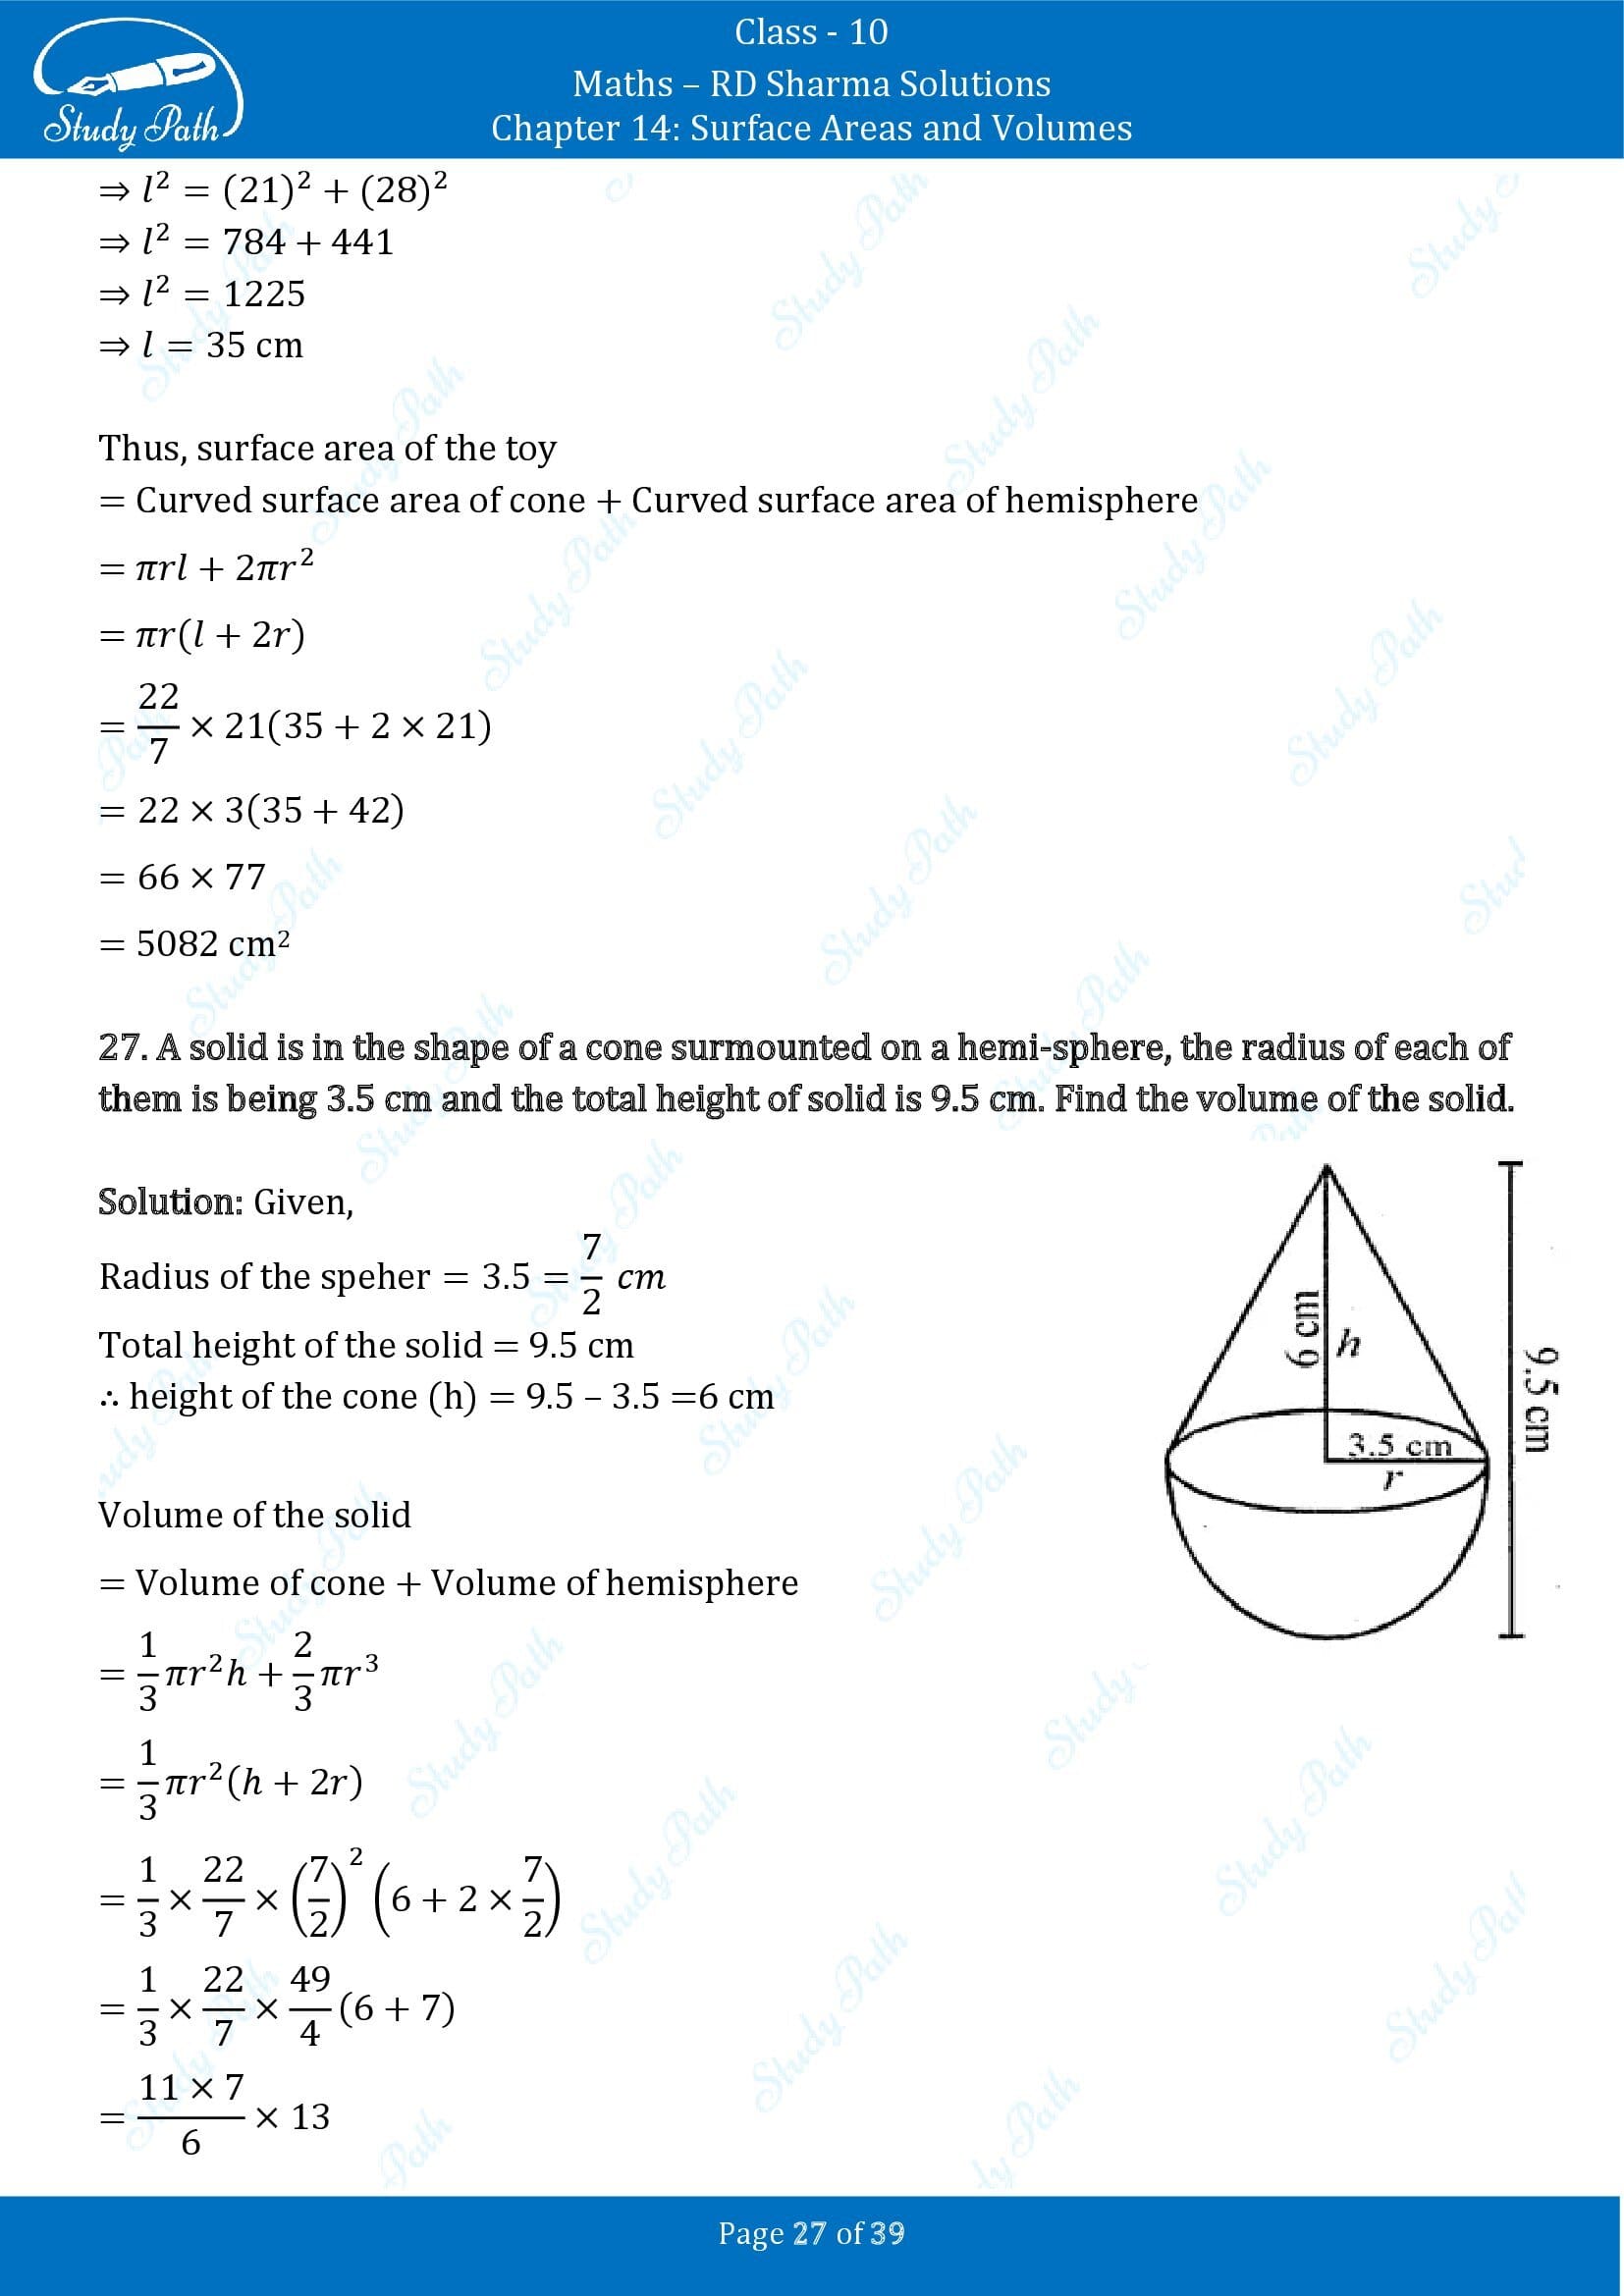 RD Sharma Solutions Class 10 Chapter 14 Surface Areas and Volumes Exercise 14.2 00027